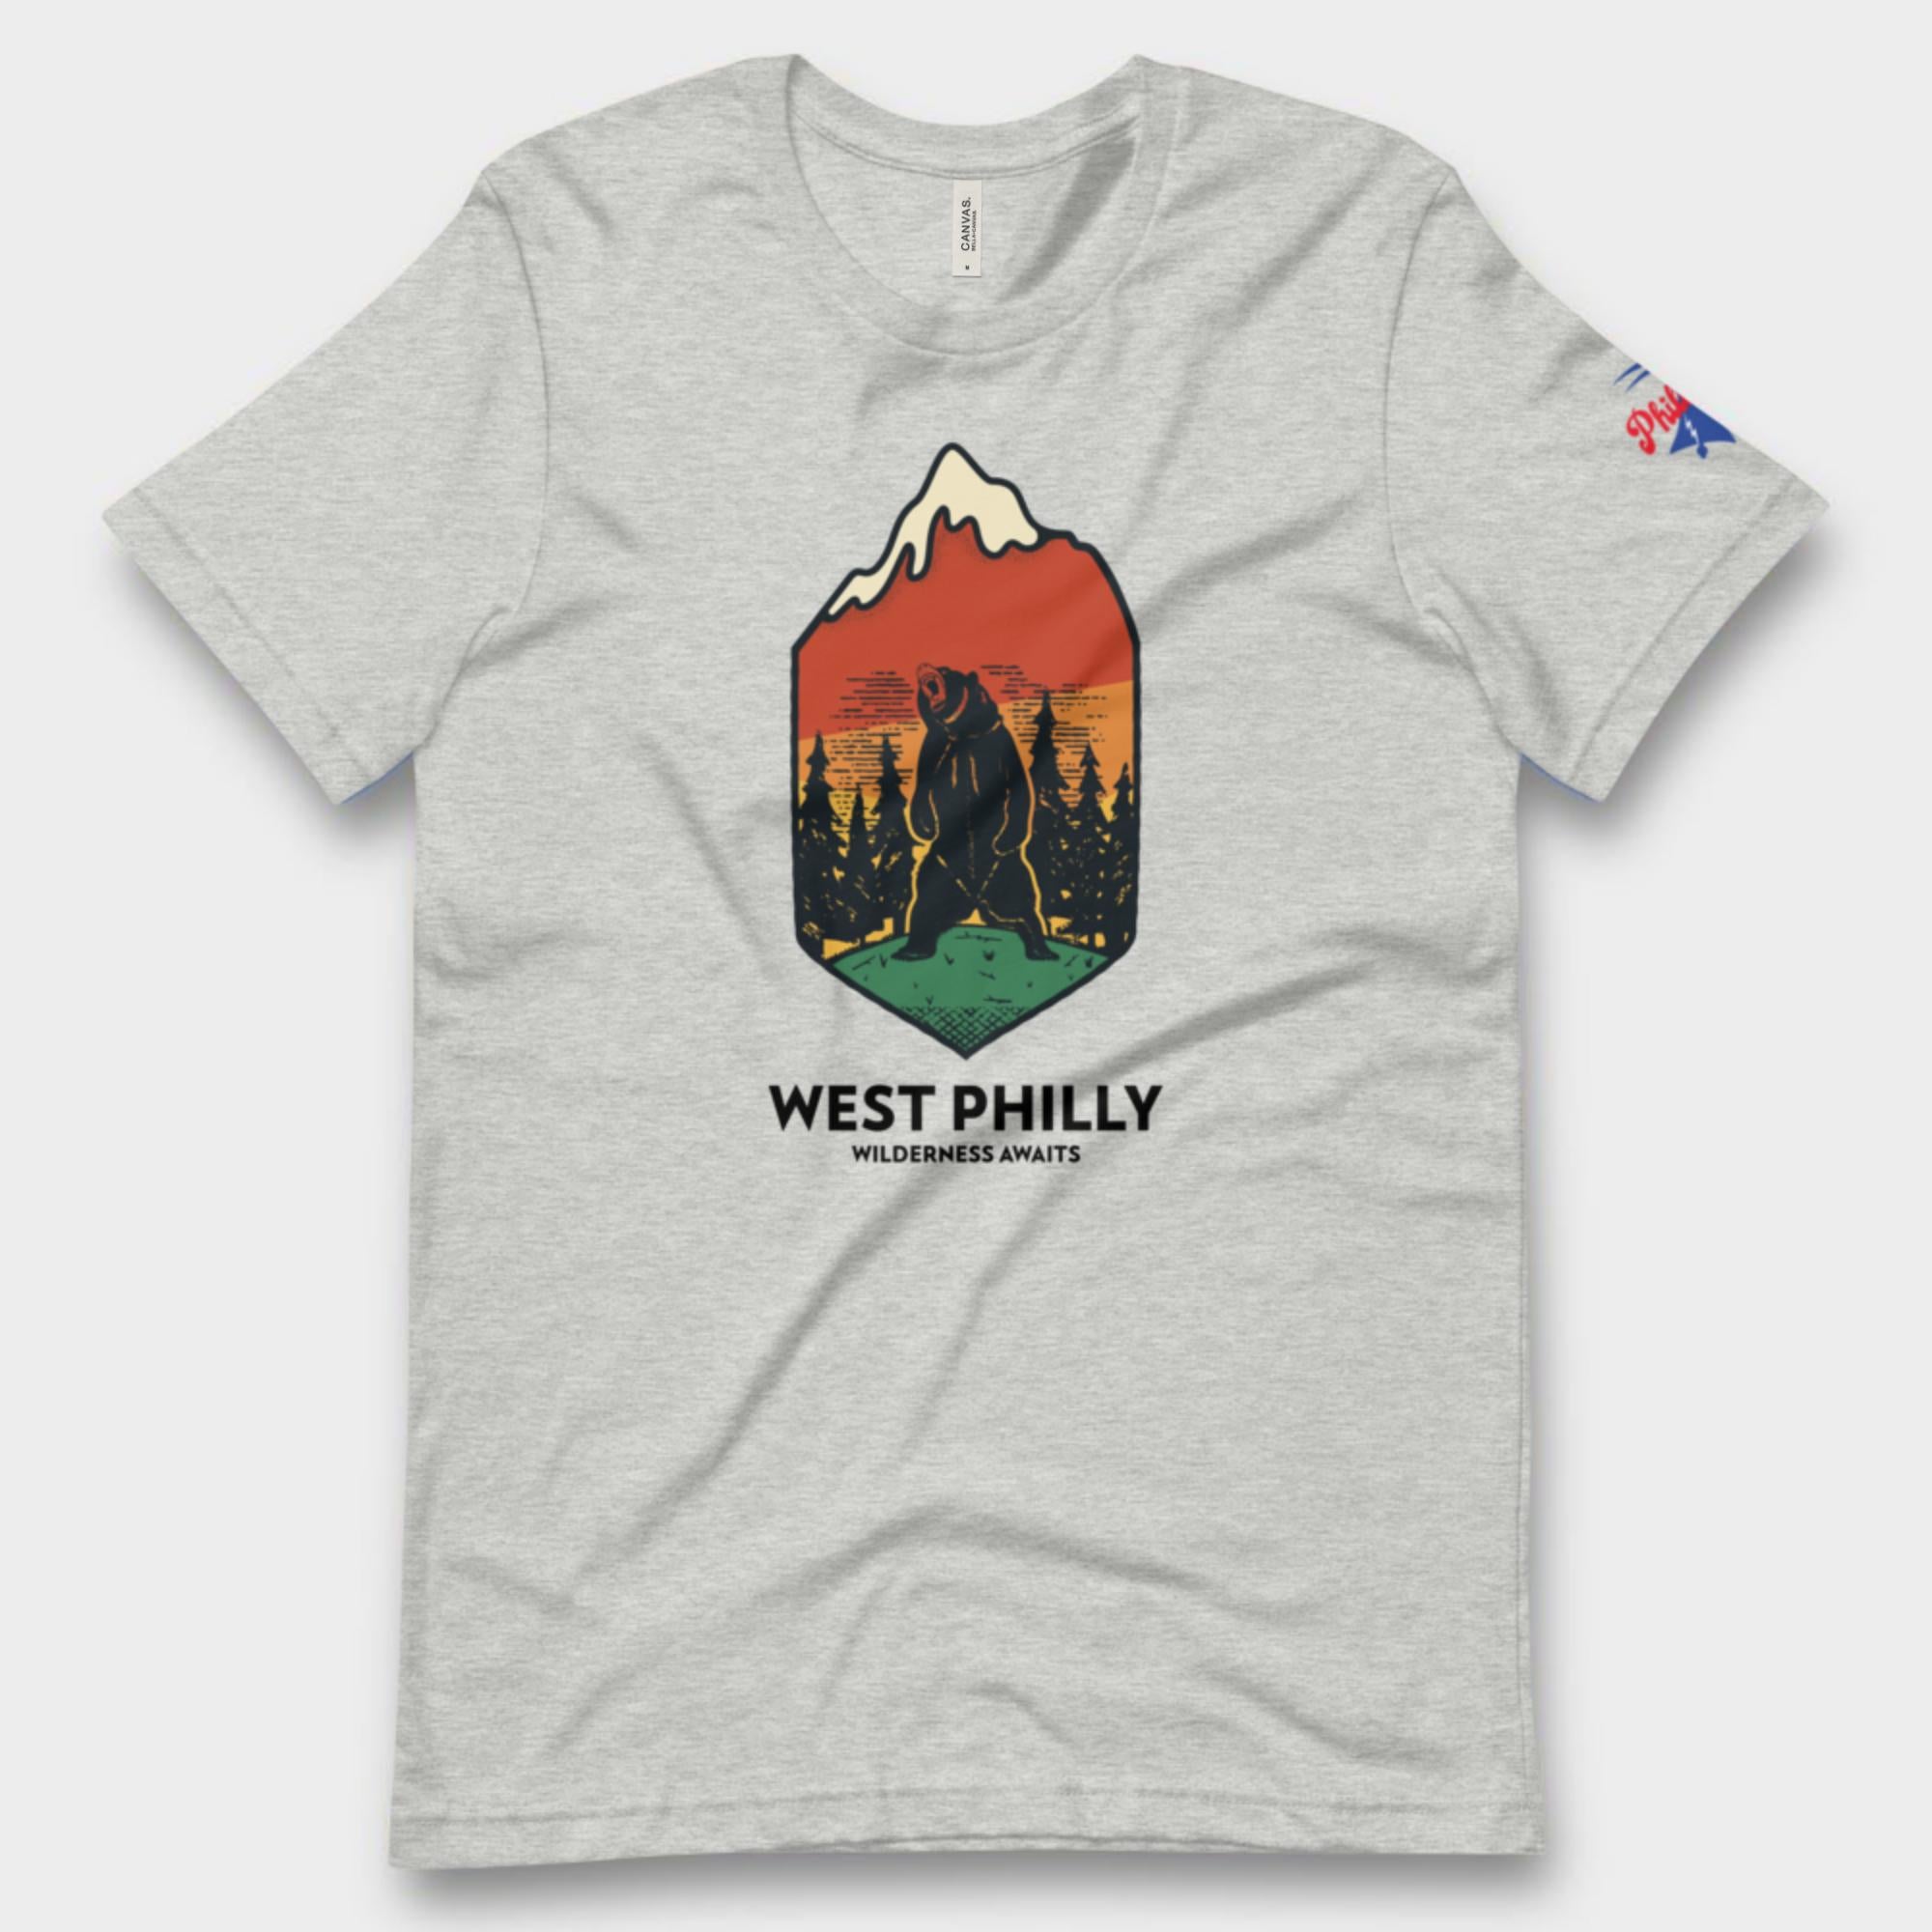 "West Philly Wilderness" Tee